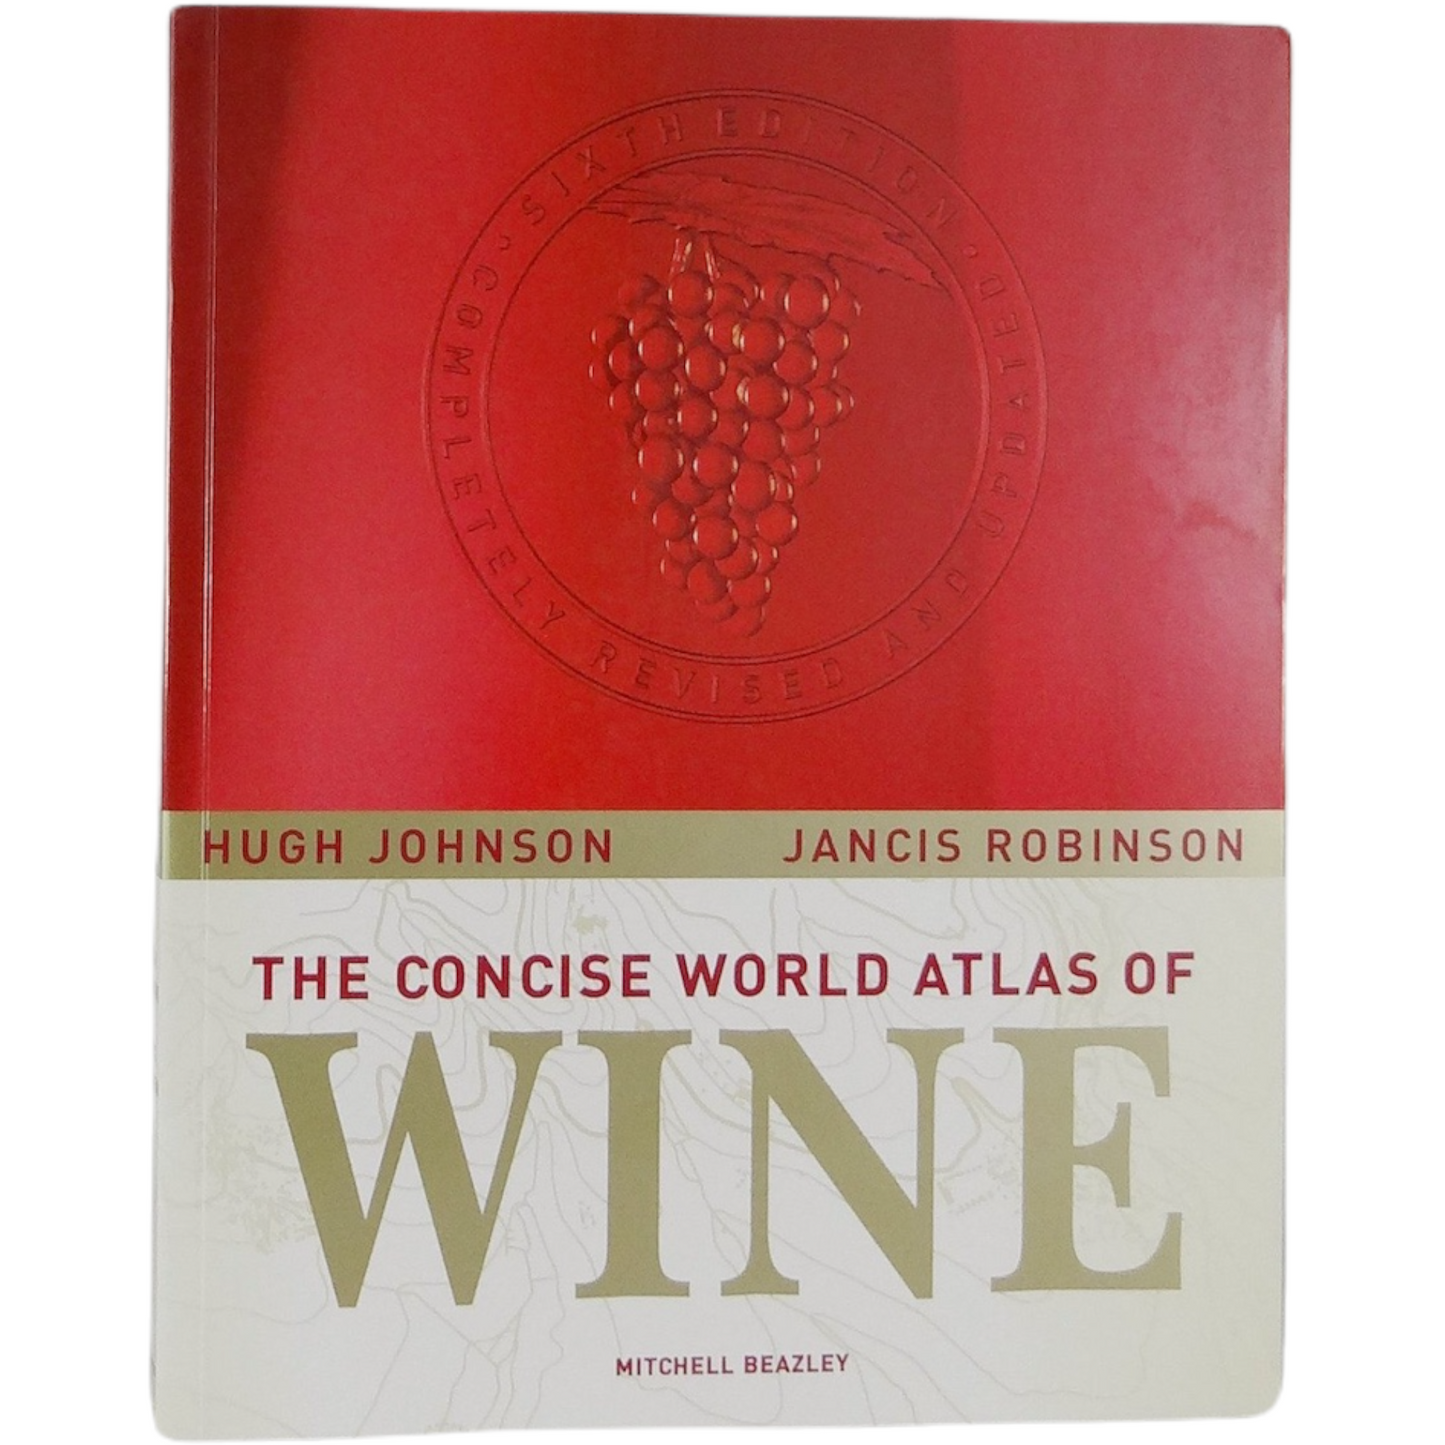 BOOK - CONCISE WORLD ATLAS OF WINE